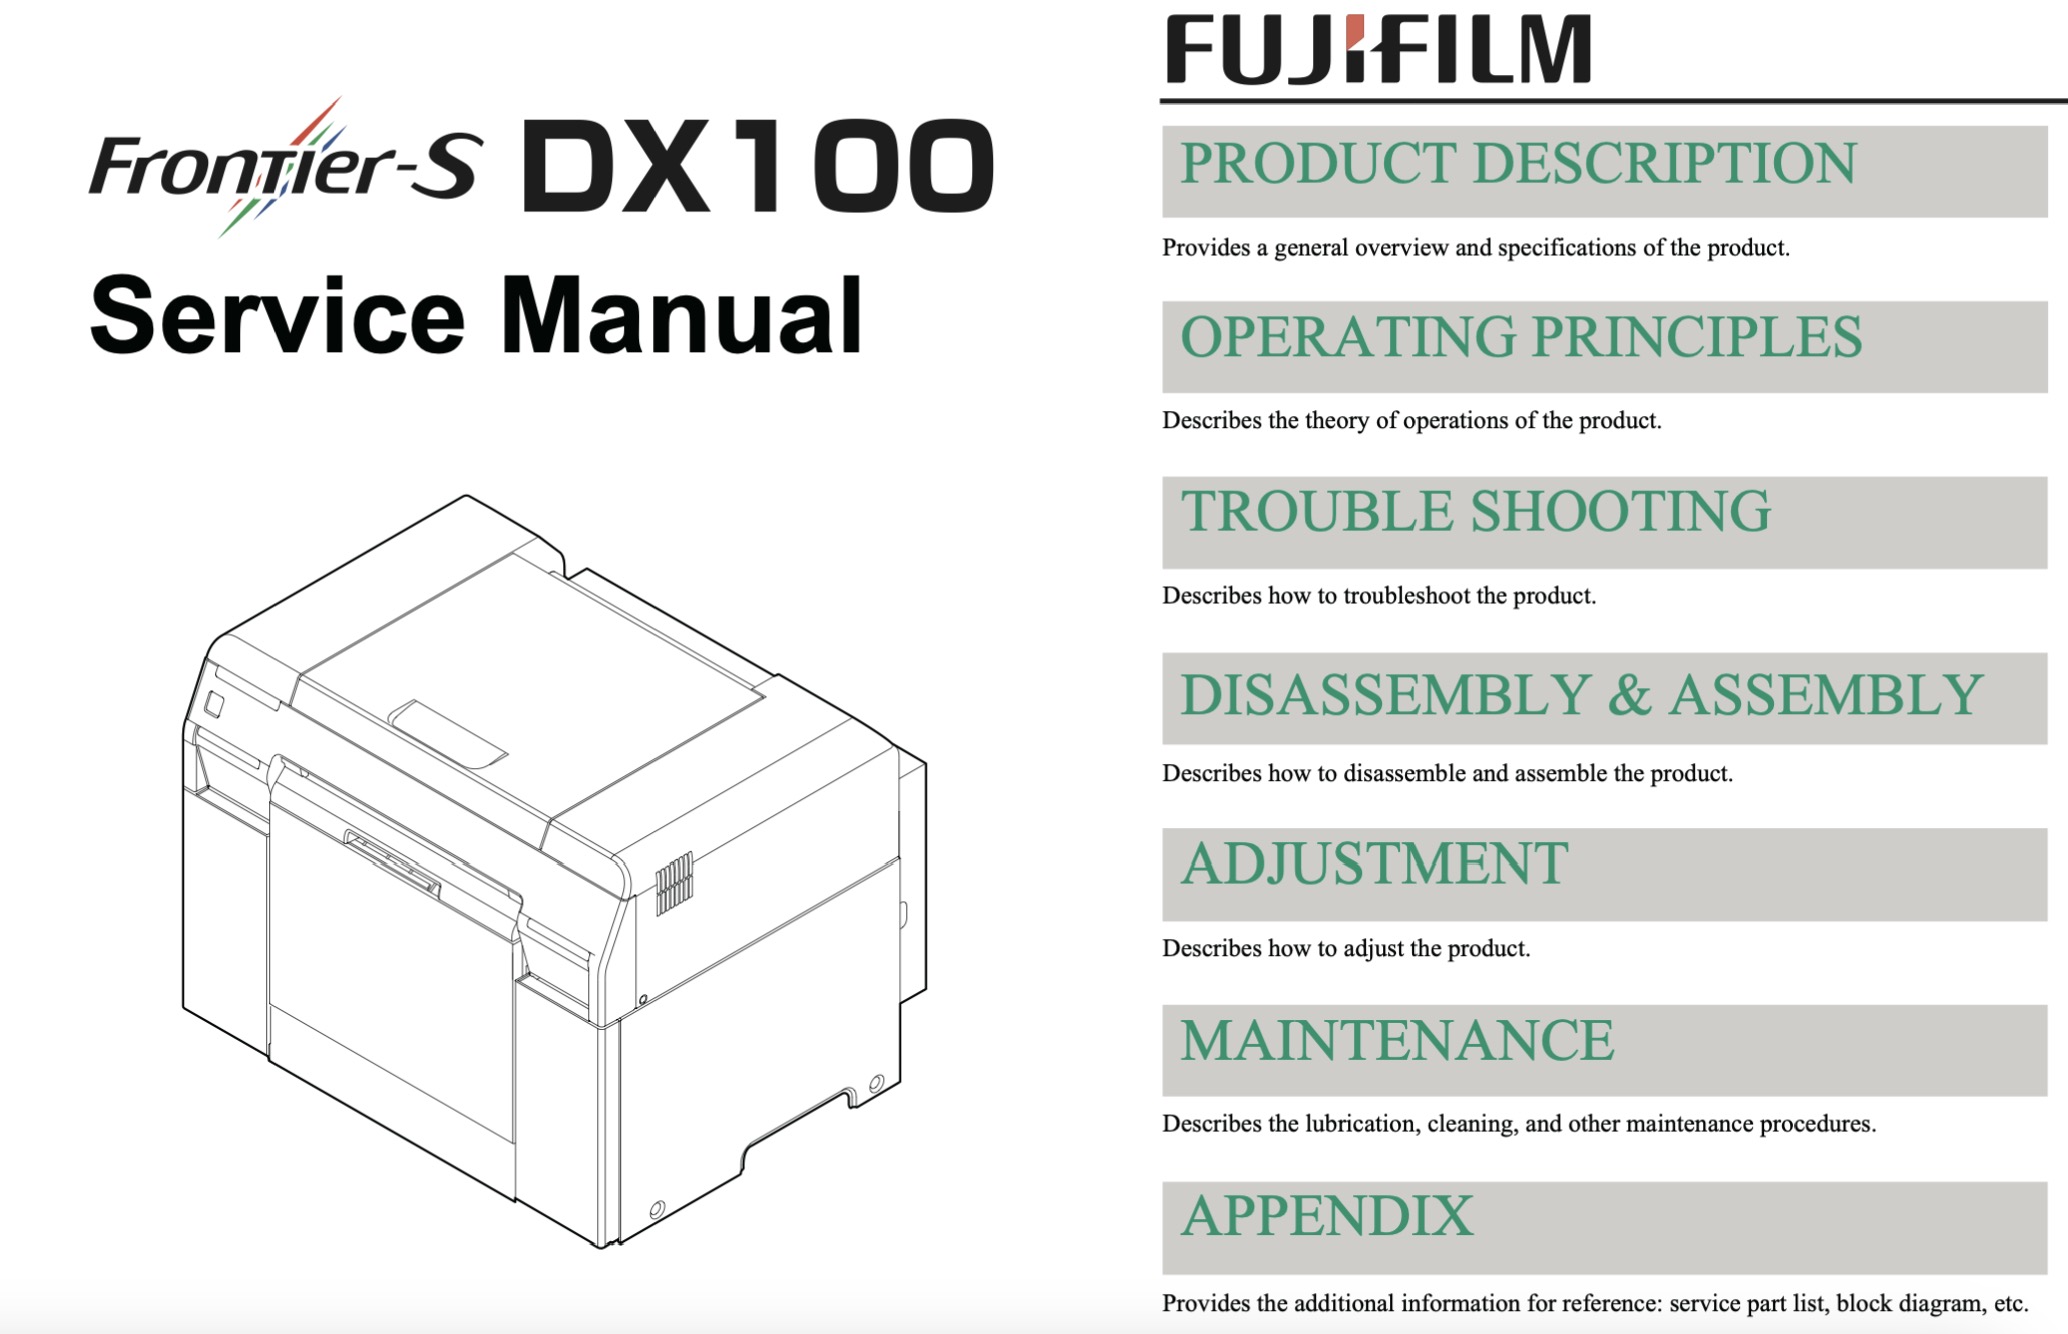 Fujifilm Frontier-S DX-100 Service Manual and also fits Epson SureLab D700, D800